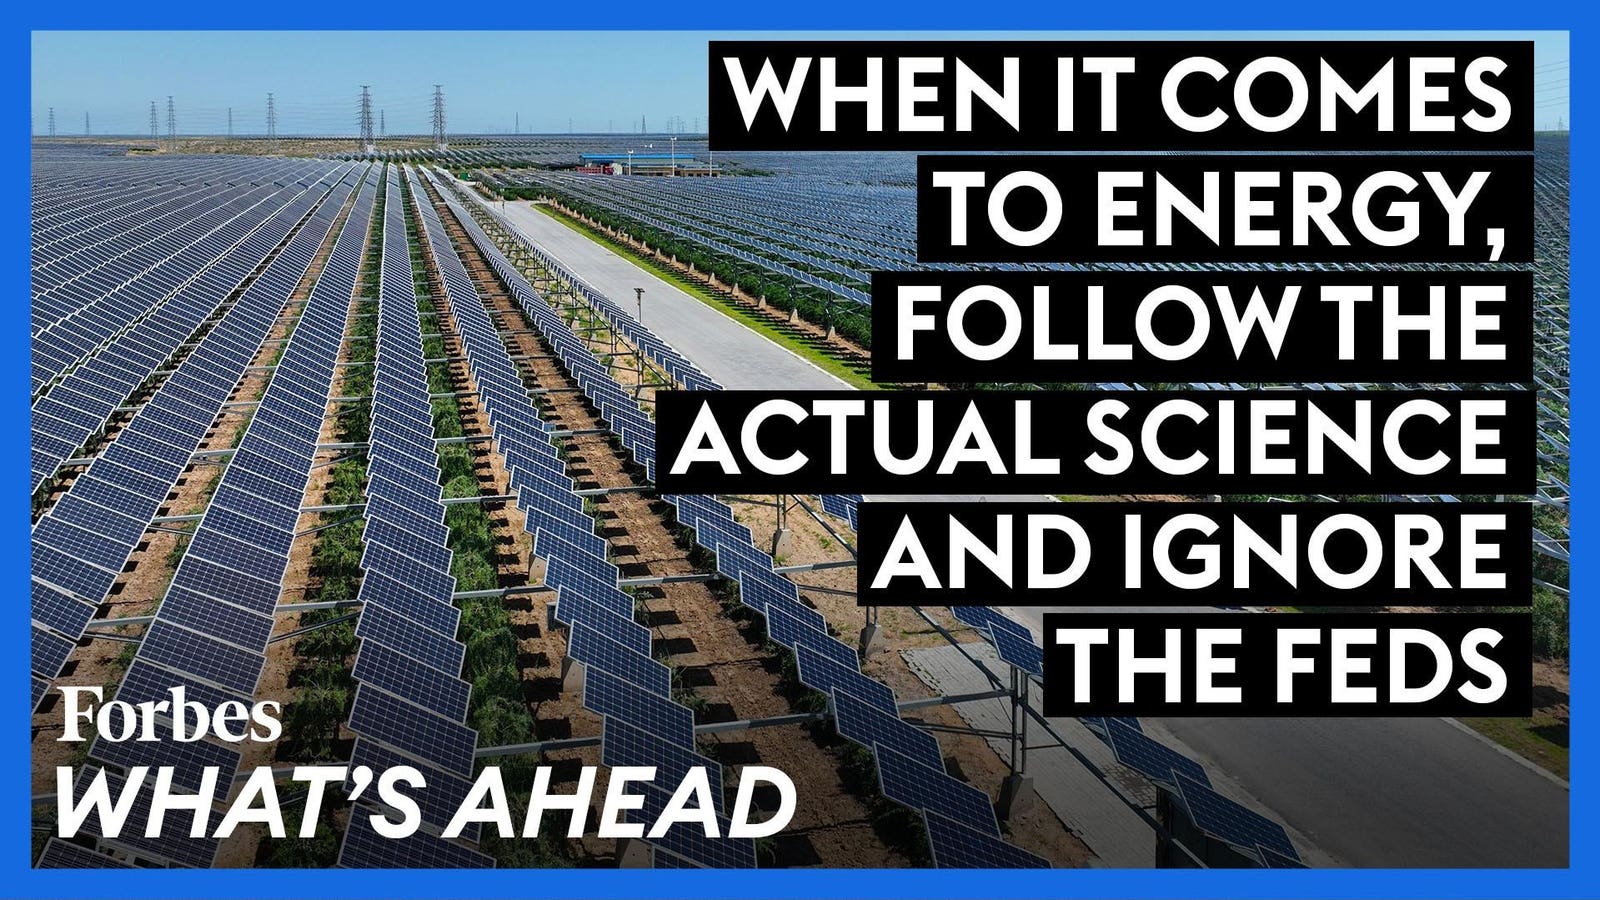 When It Comes To Energy, Follow The Actual Science And Ignore The Feds